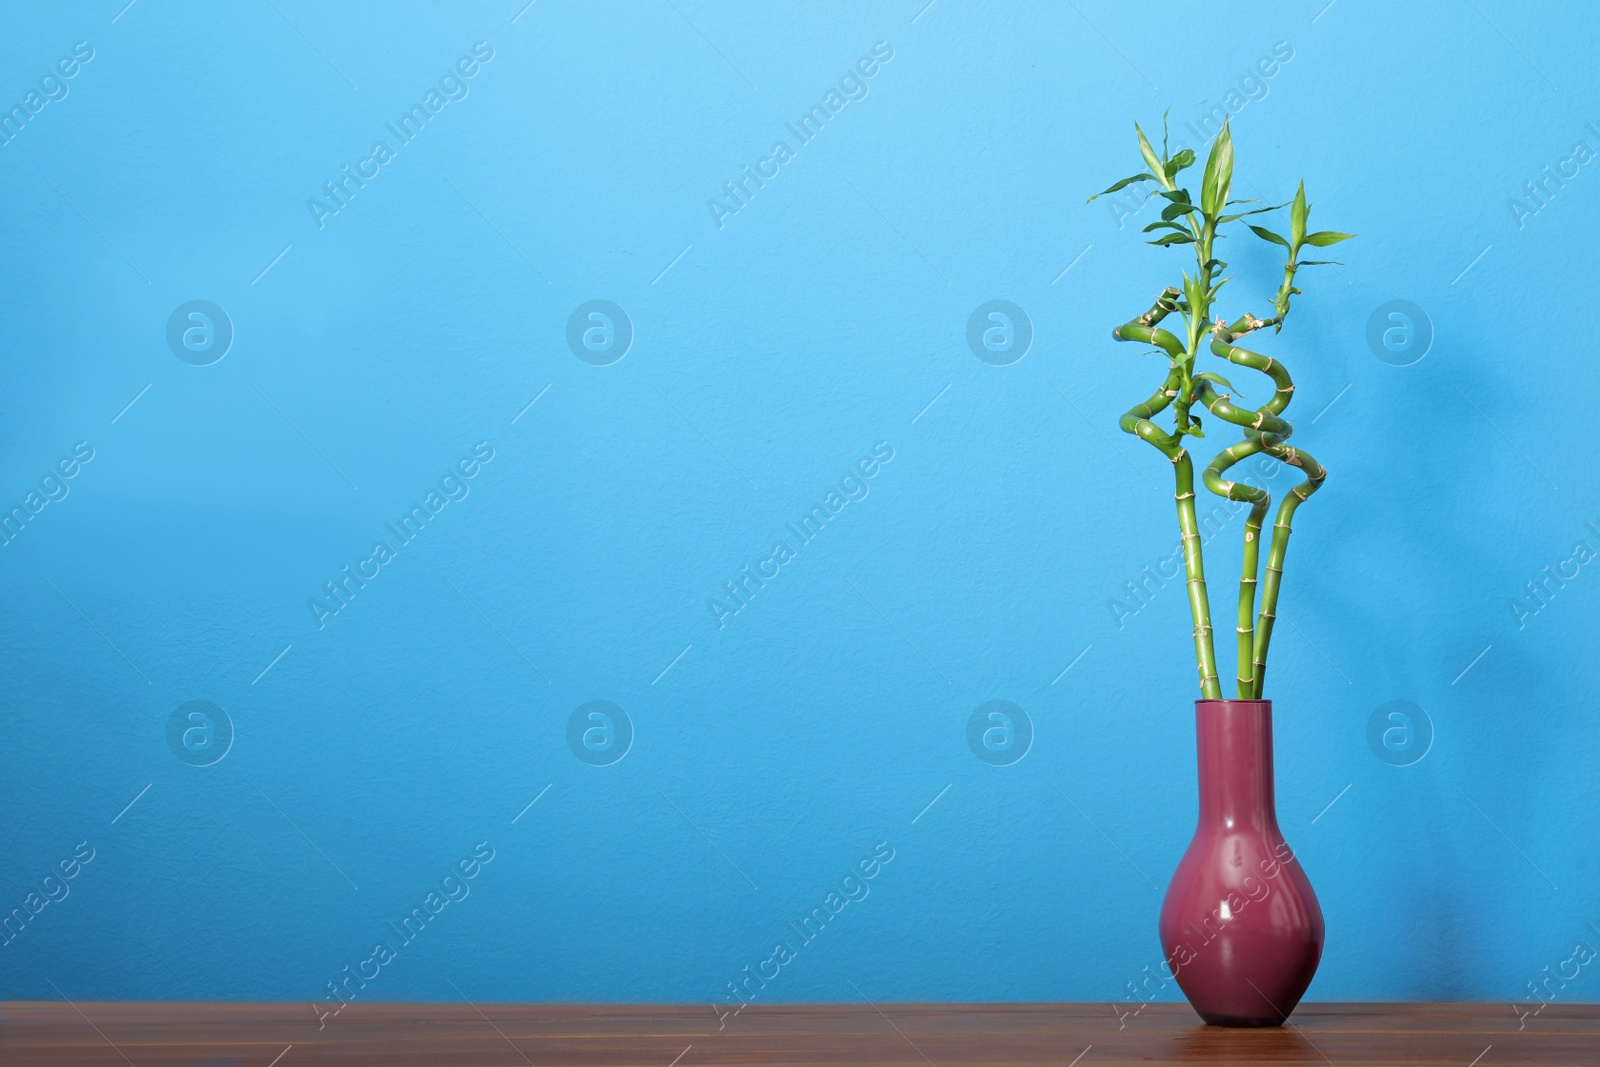 Photo of Vase with bamboo stems on wooden table against blue wall, space for text